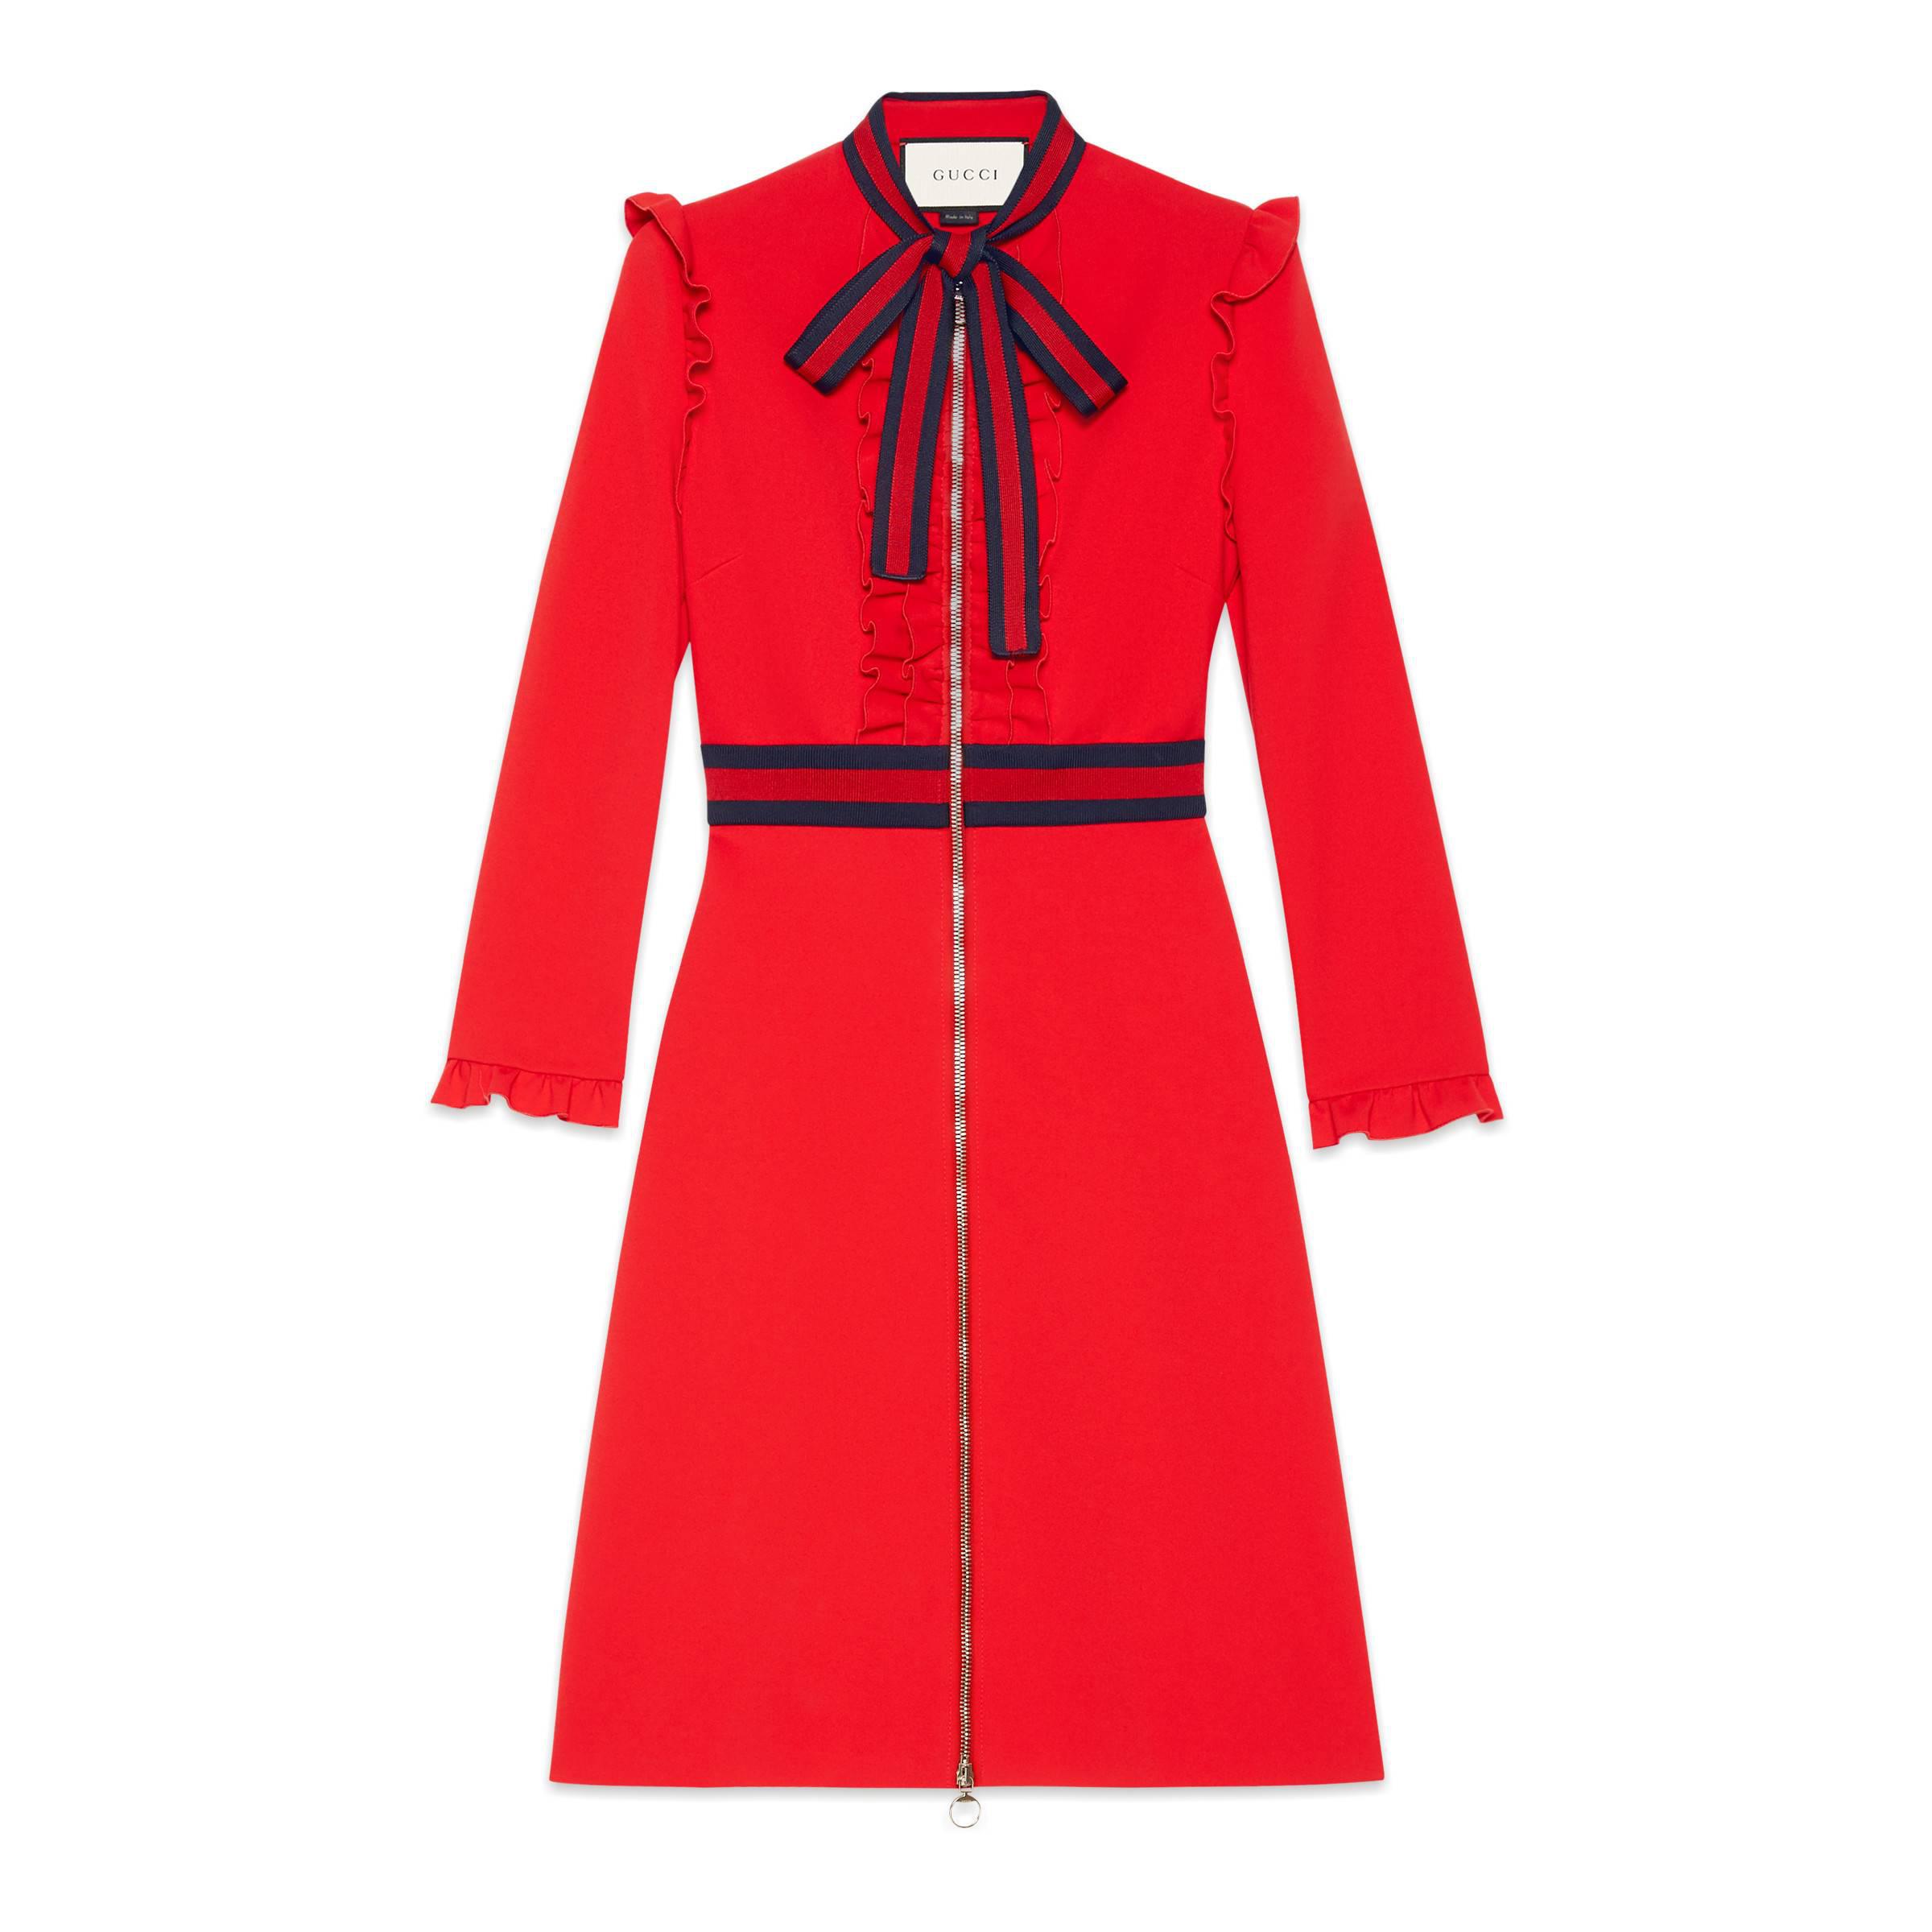 Gucci Viscose Jersey Dress in Red | Lyst